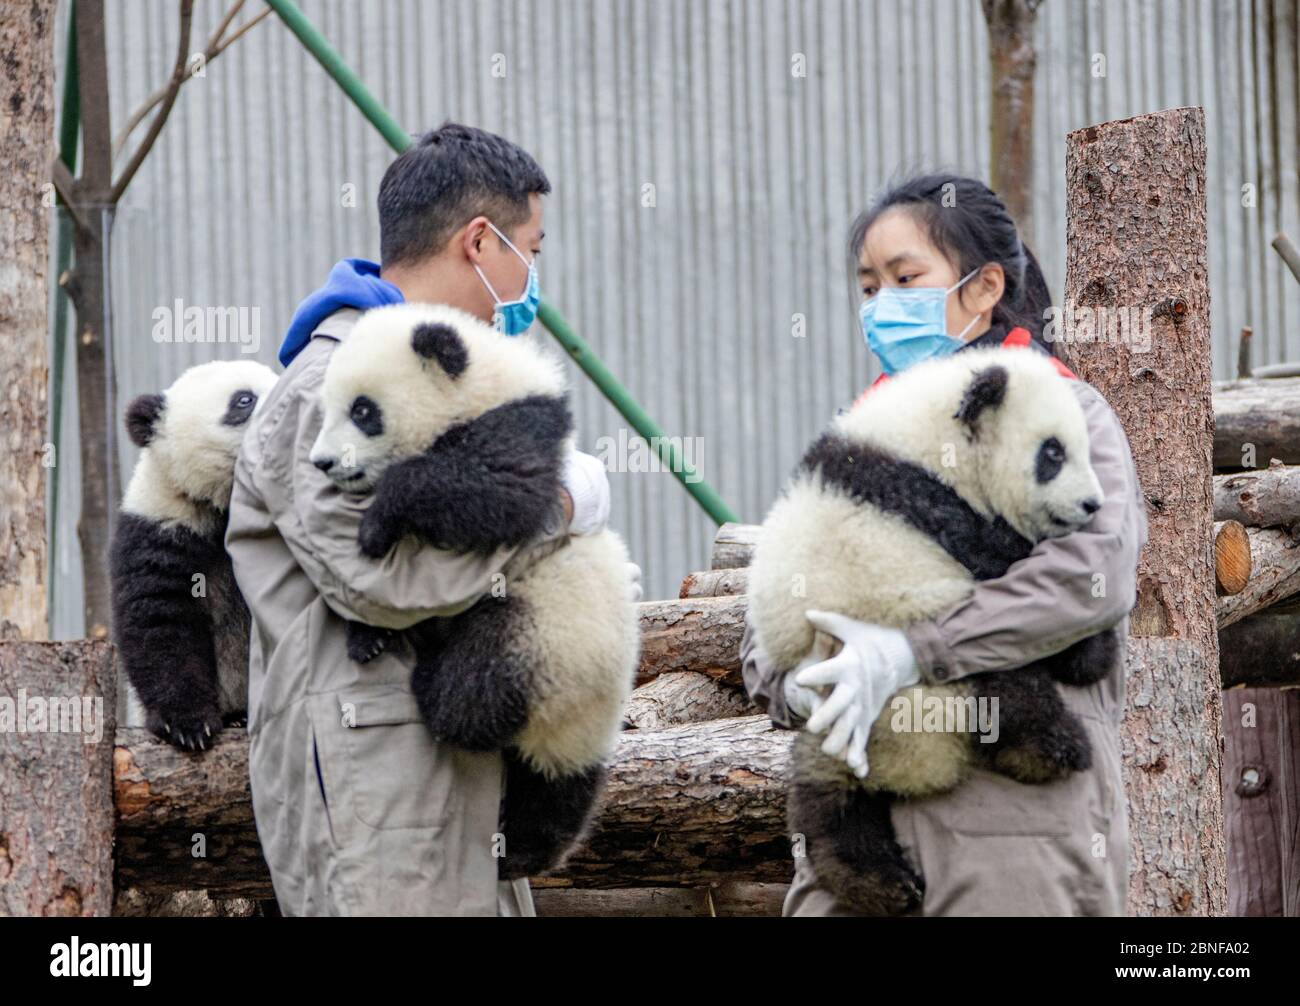 Giant panda cubs are well taken care of by their feeders, who are just like their parents and babysitters, at China Conservation and Research Center f Stock Photo